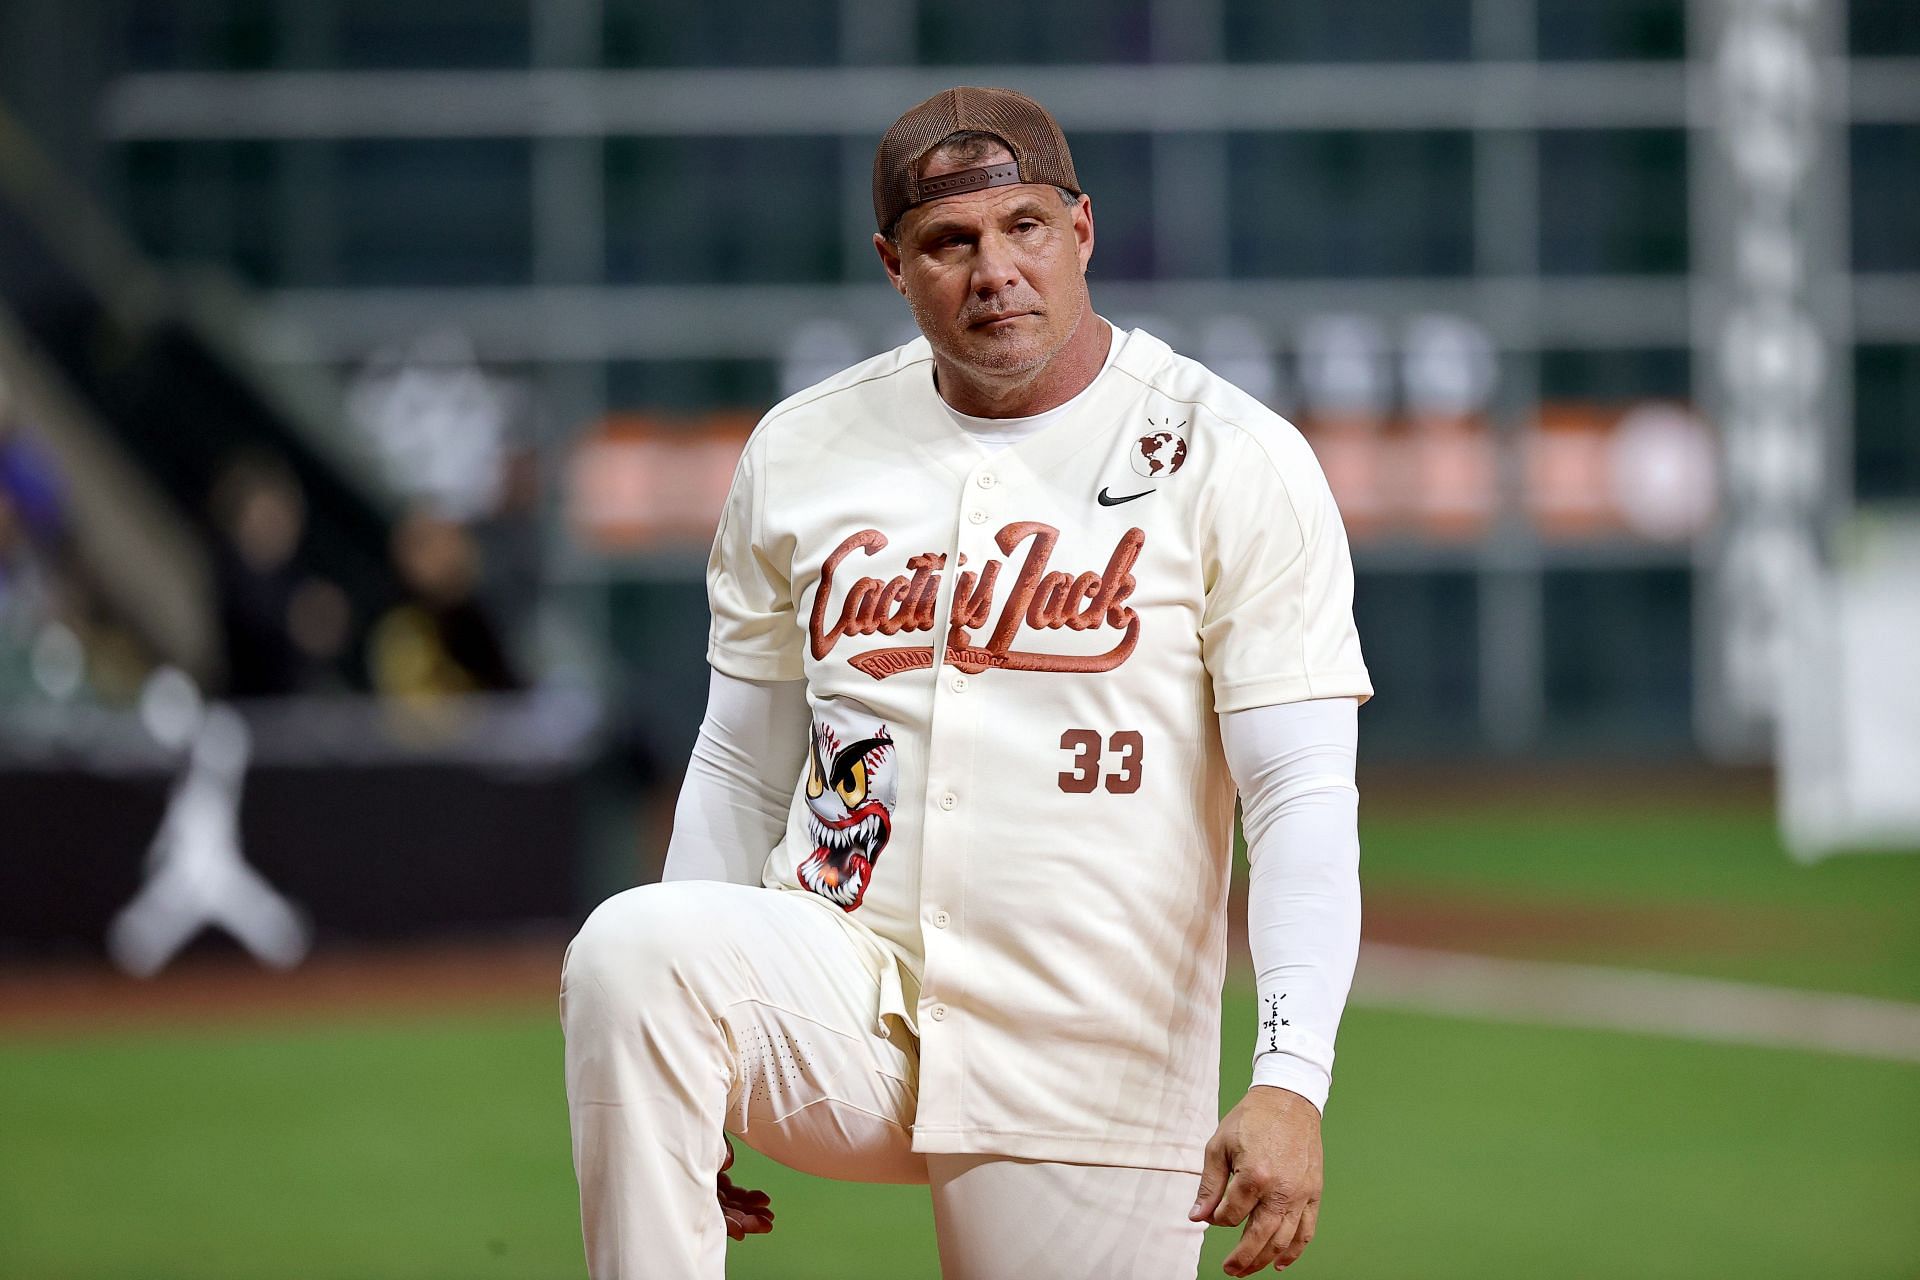 Jose Canseco at the 2023 Cactus Jack Foundation HBCU Celebrity Softball Classic